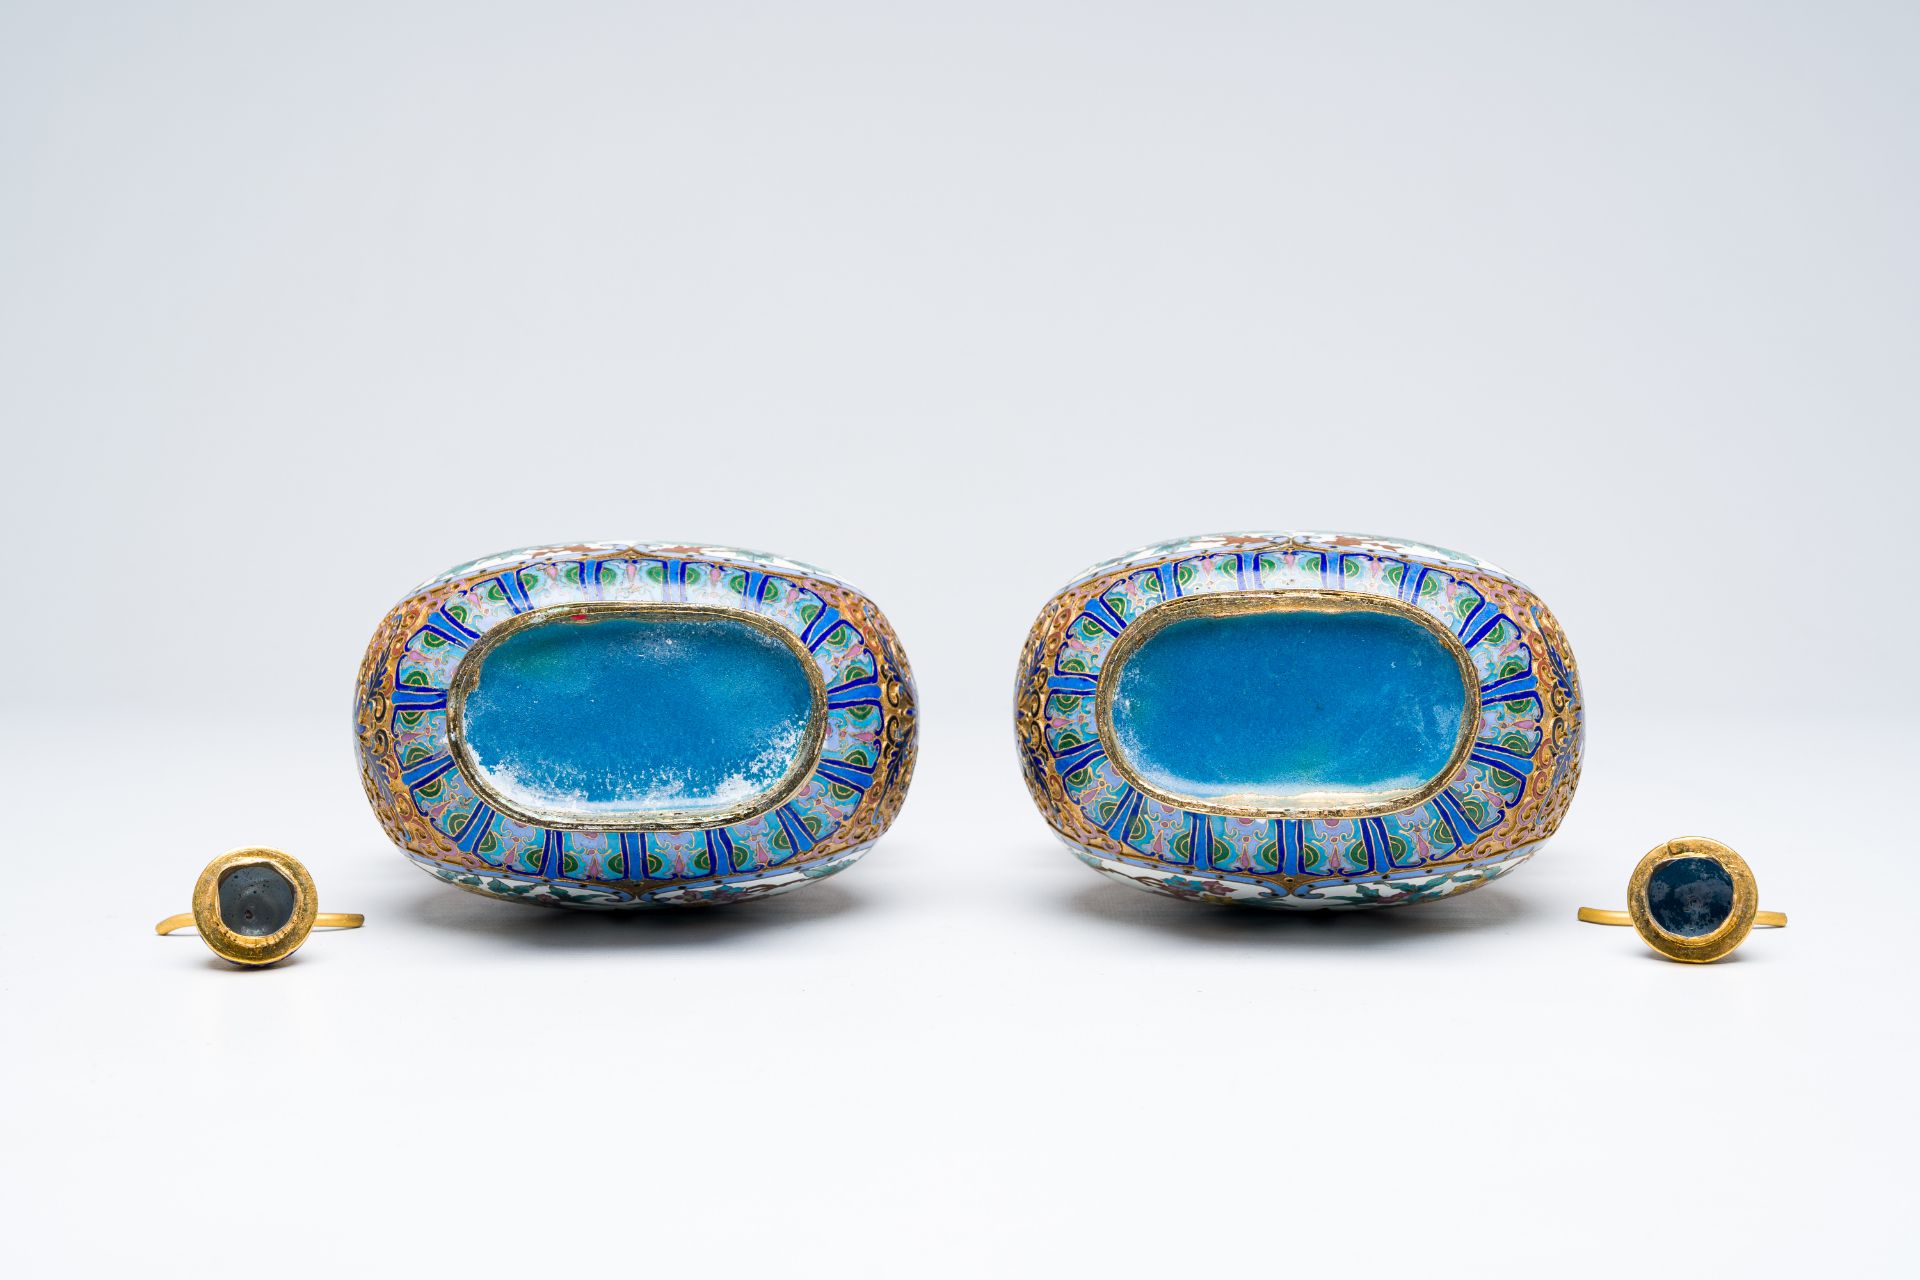 A pair of Chinese cloisonne double gourd vases on wooden stands, 20th C. - Image 7 of 9